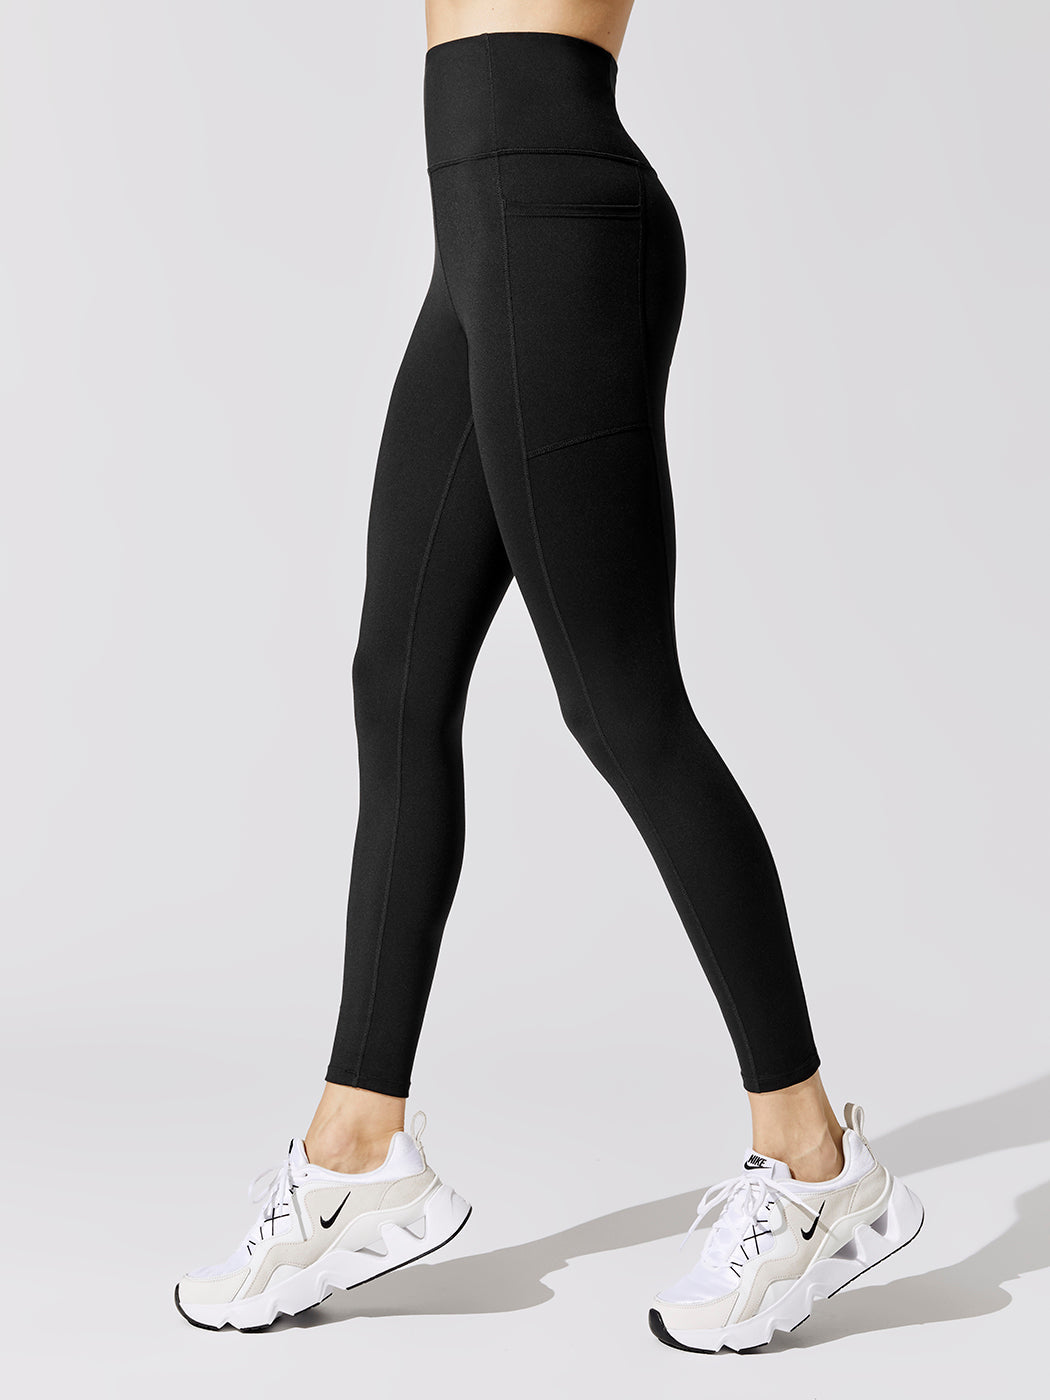 Carbon38 High Rise 7/8 Legging With Pockets In Cloud Compression